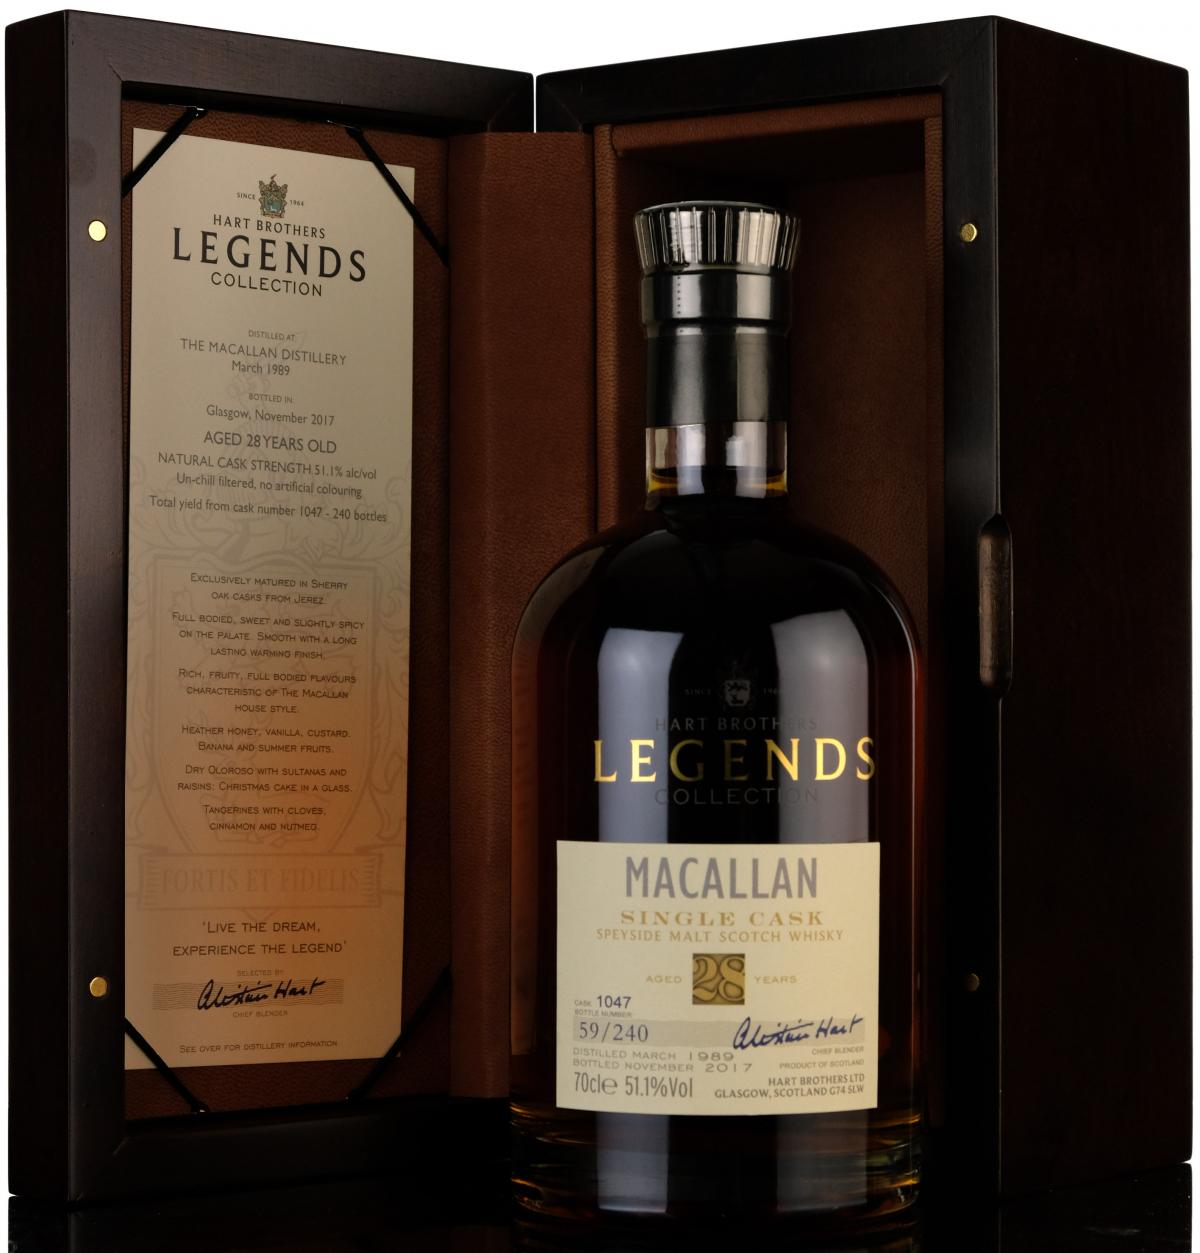 Macallan 1989-2017 | 28 Year Old | Hart Brothers Legends Collection